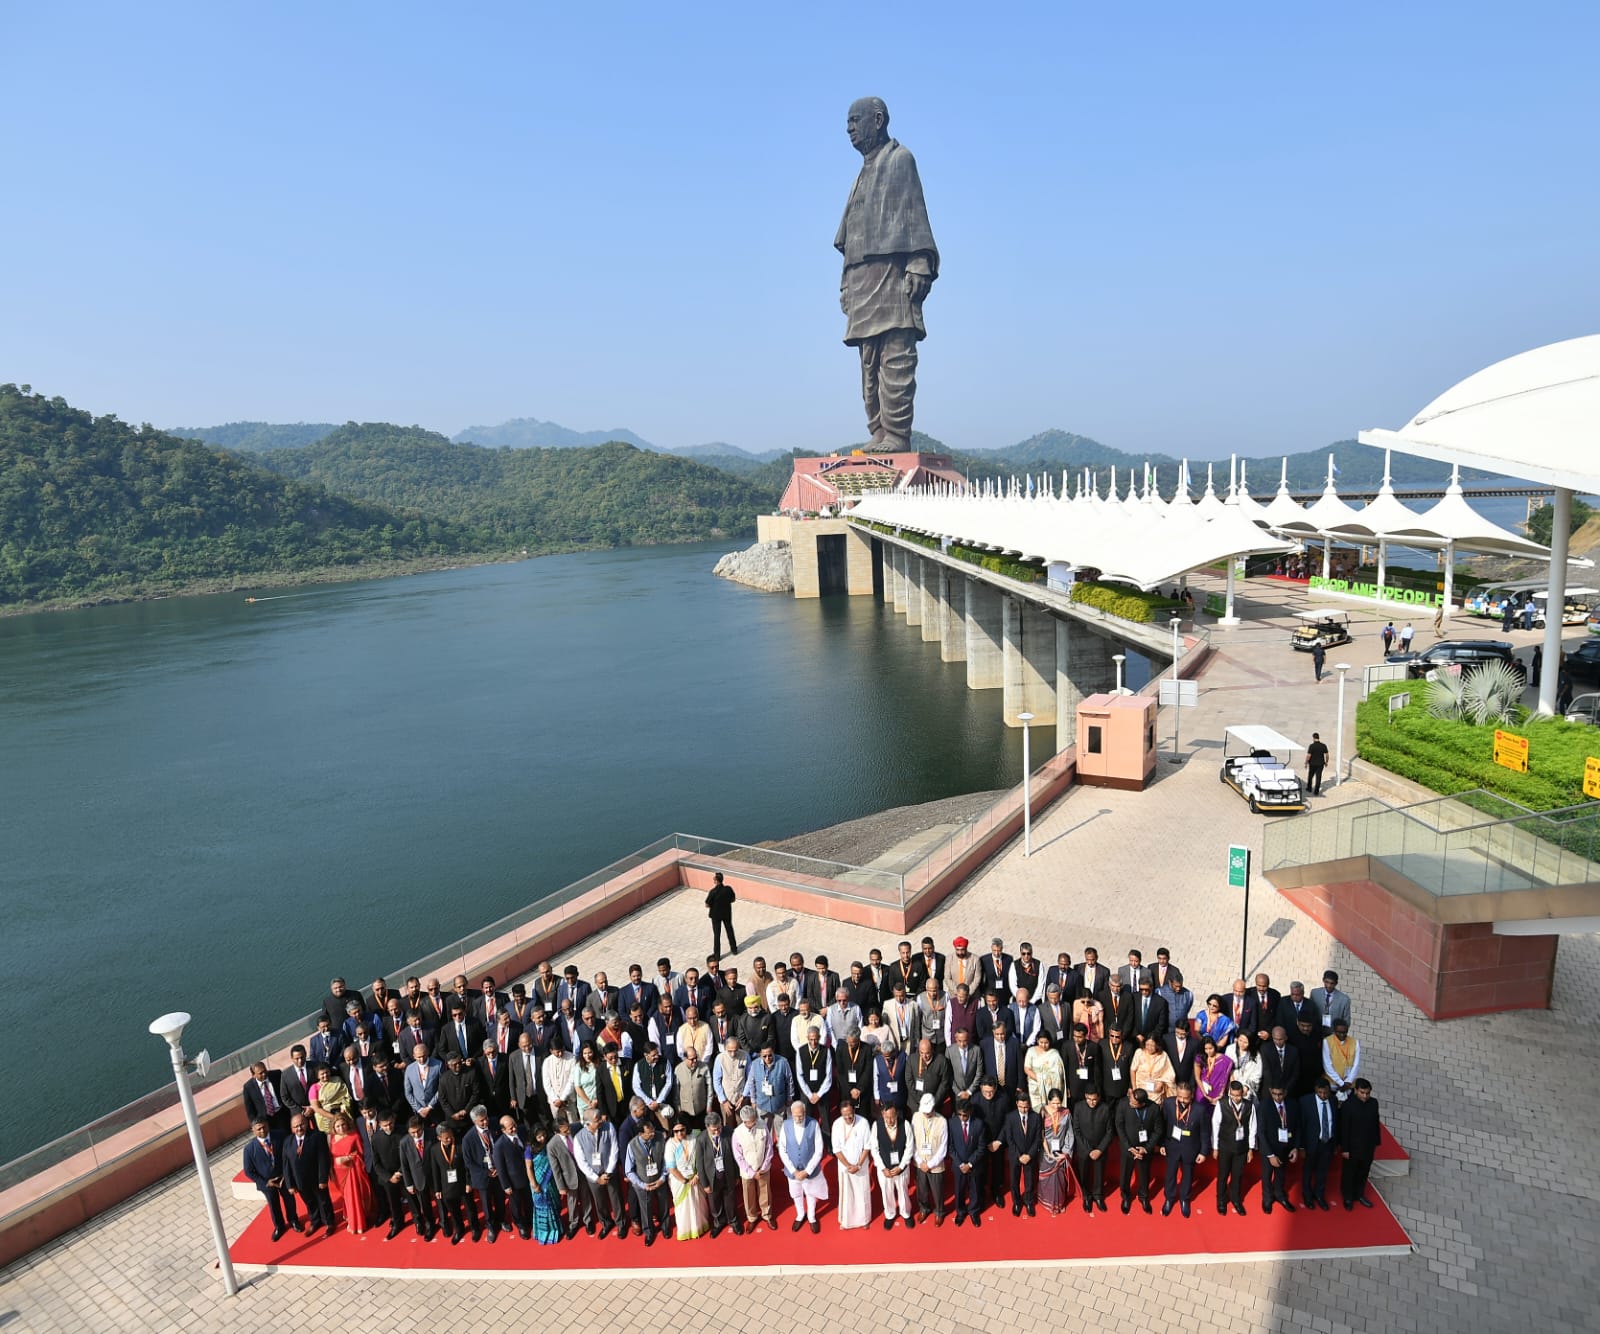 Hon’ble PM addressed 10th India’s Heads of Mission conference attended by HC Inbasekar S. LIFE event launched by PM in presence of UNSG Guterres, attended by HOMs in front of Statue of Unity, Kevadia, Gujarat on October 20, 2022.